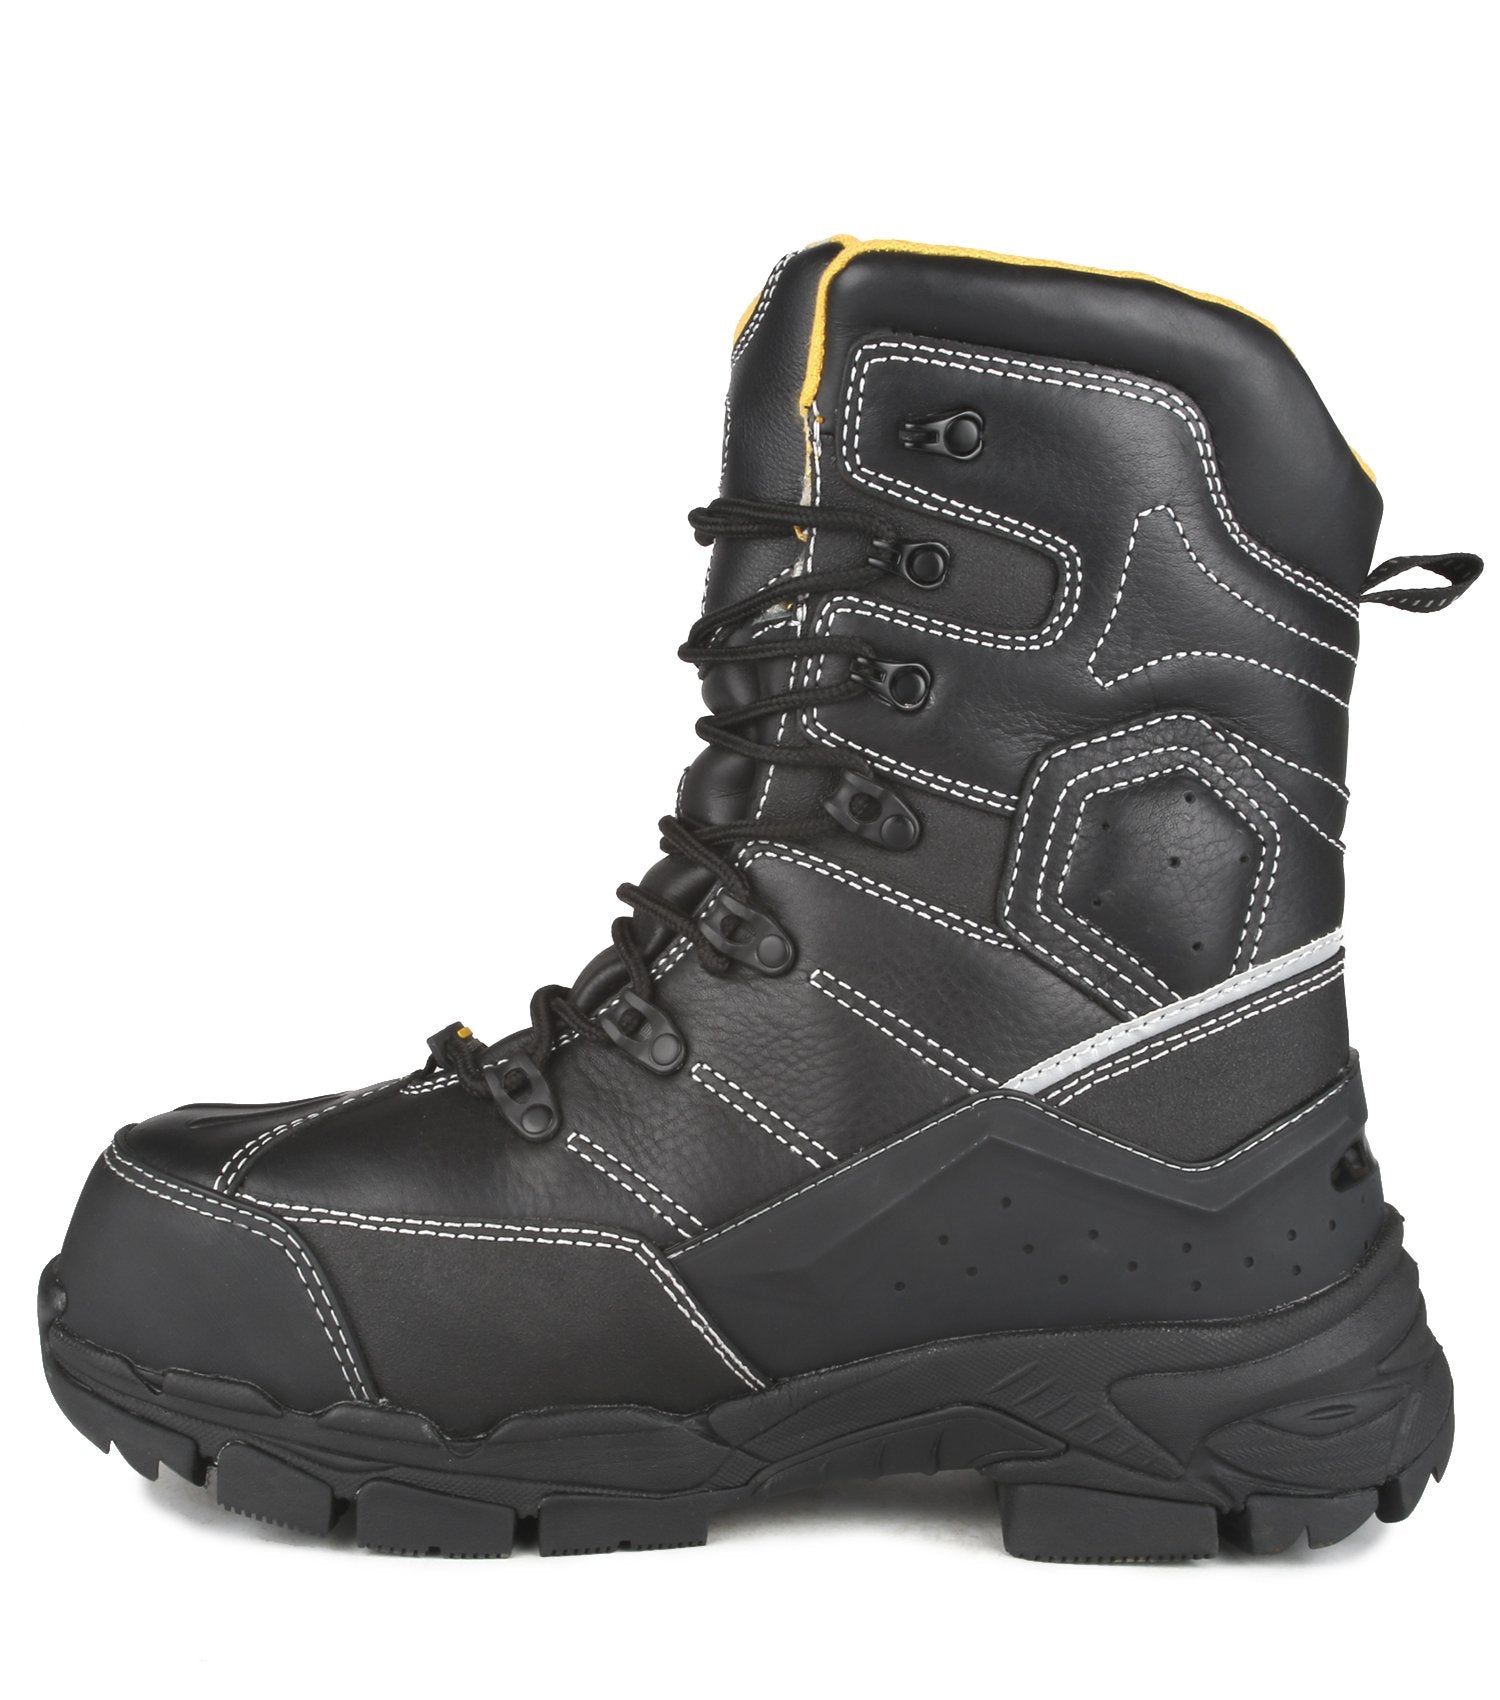 Acton Cannonball 8" Men's Composite Toe Internal Metguard Winter Safety Work Boots | -59°C/-75°F Rated | Sizes 7-14 Work Boots - Cleanflow